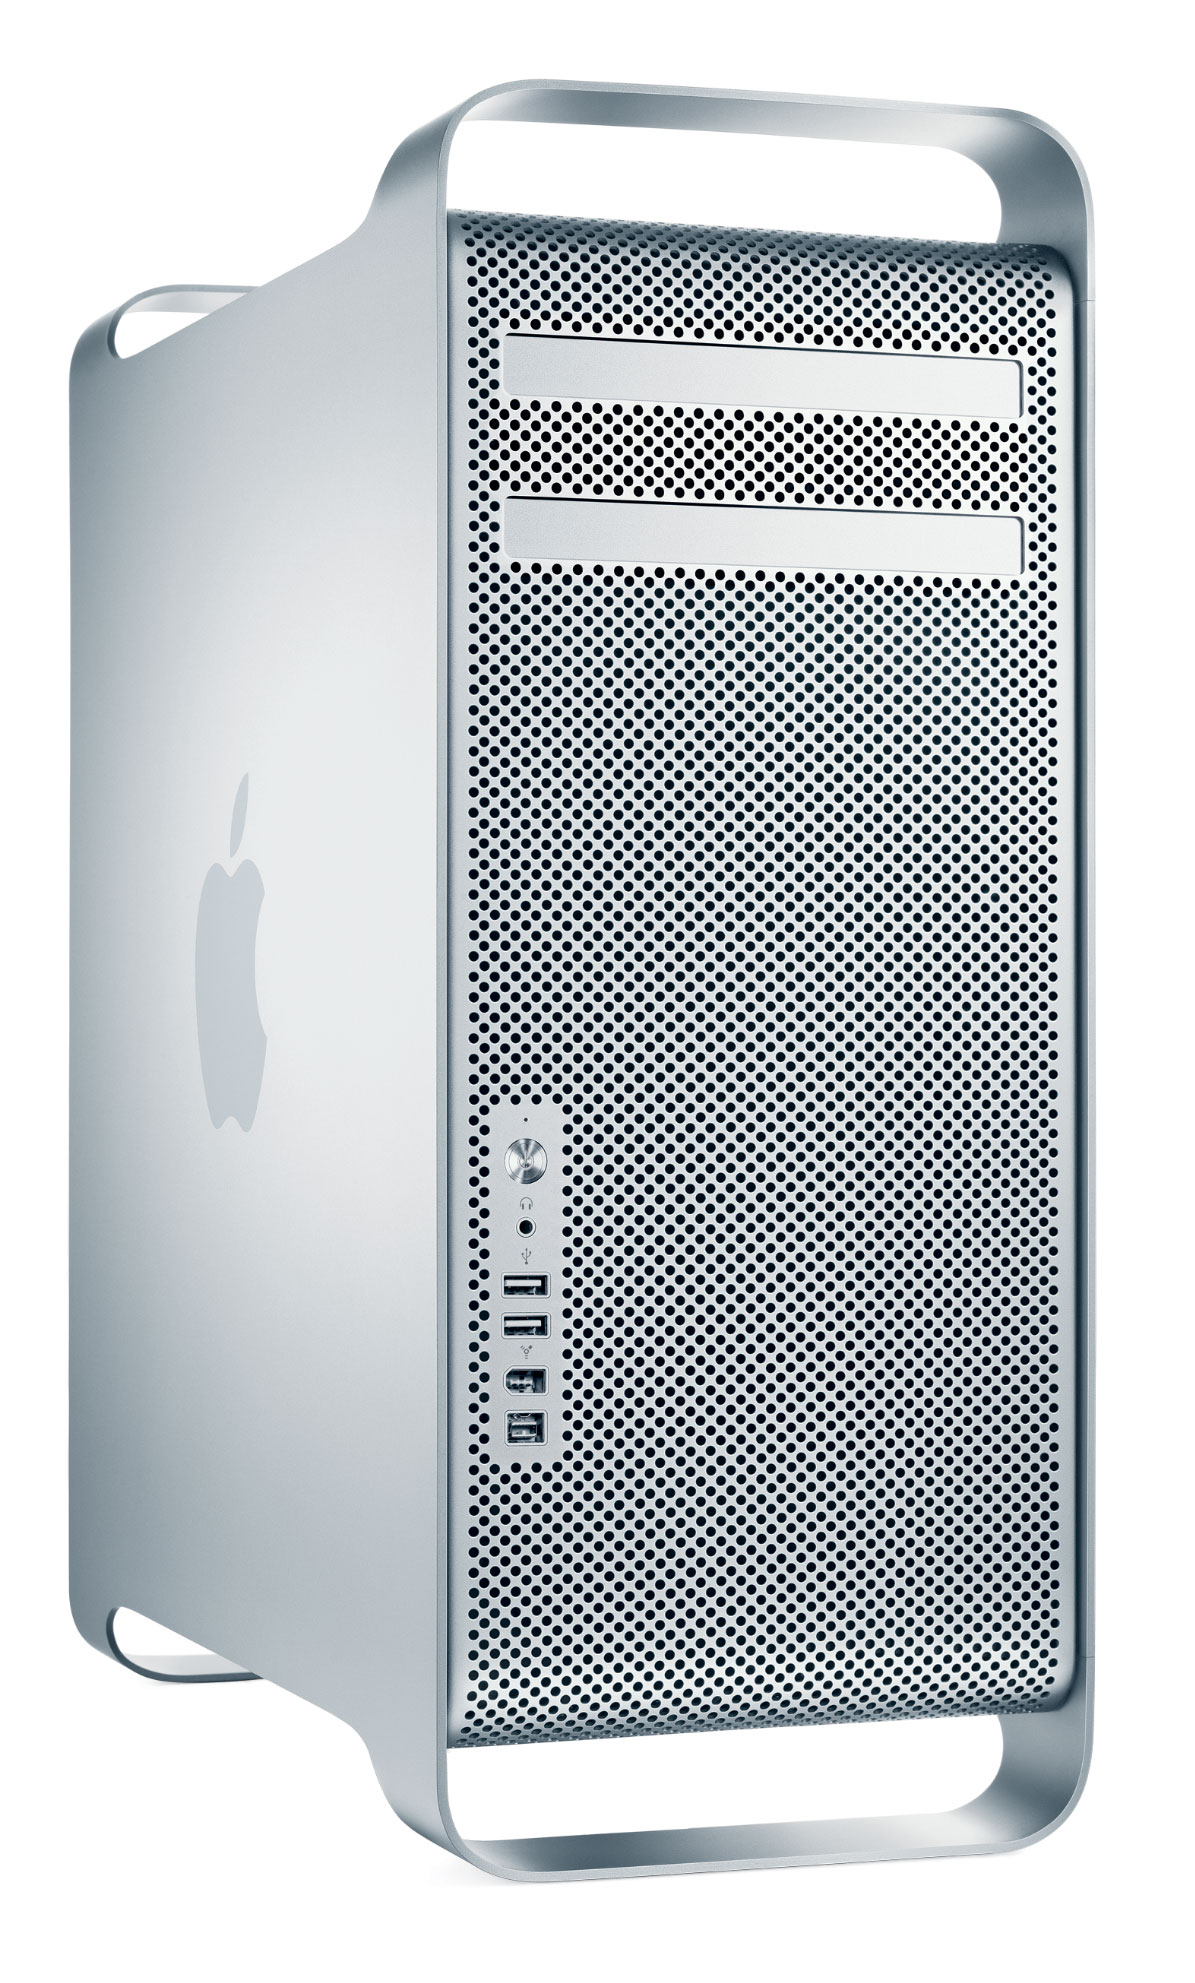 Mac Pro Cases and Parts